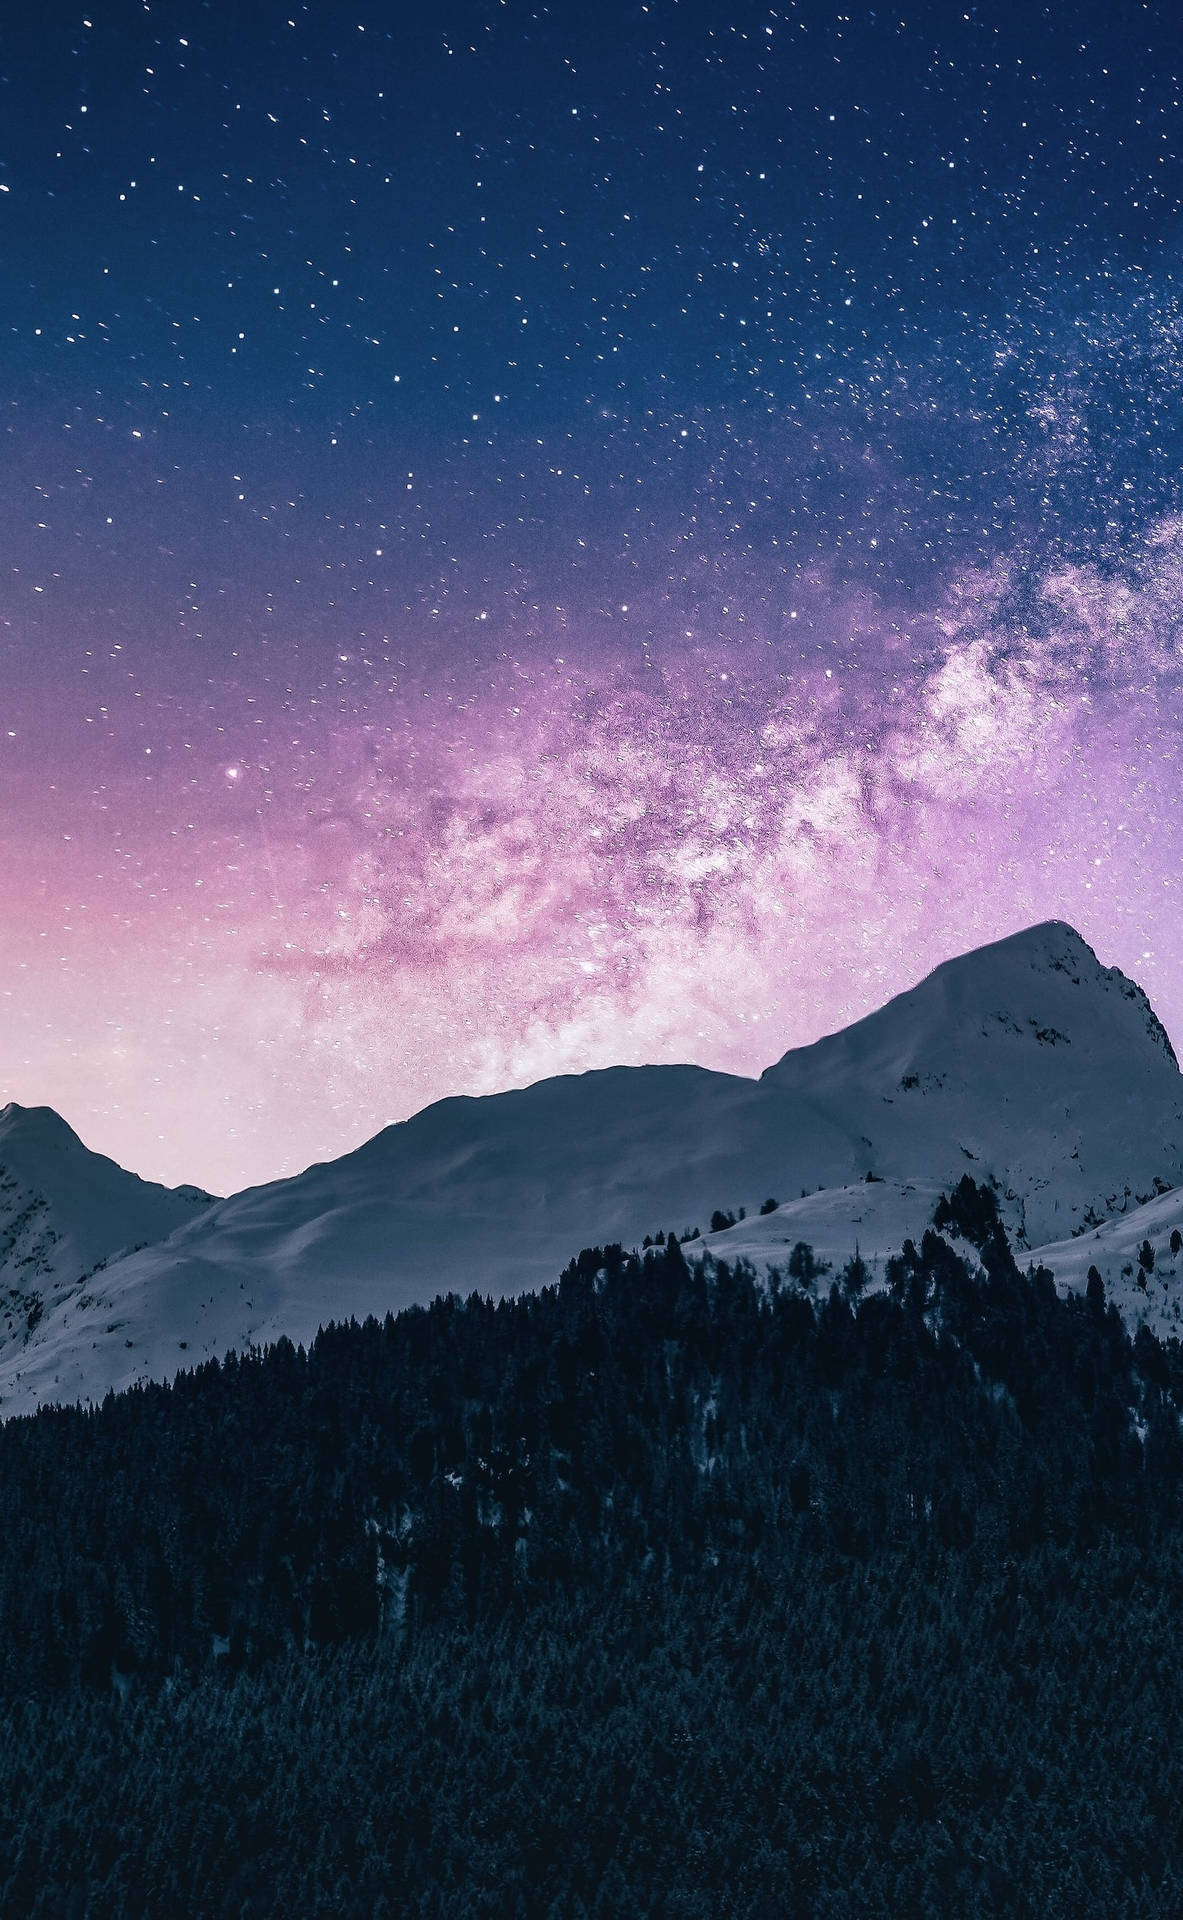 Download Purple Galaxy Icy Mountain Iphone Wallpaper | Wallpapers.com